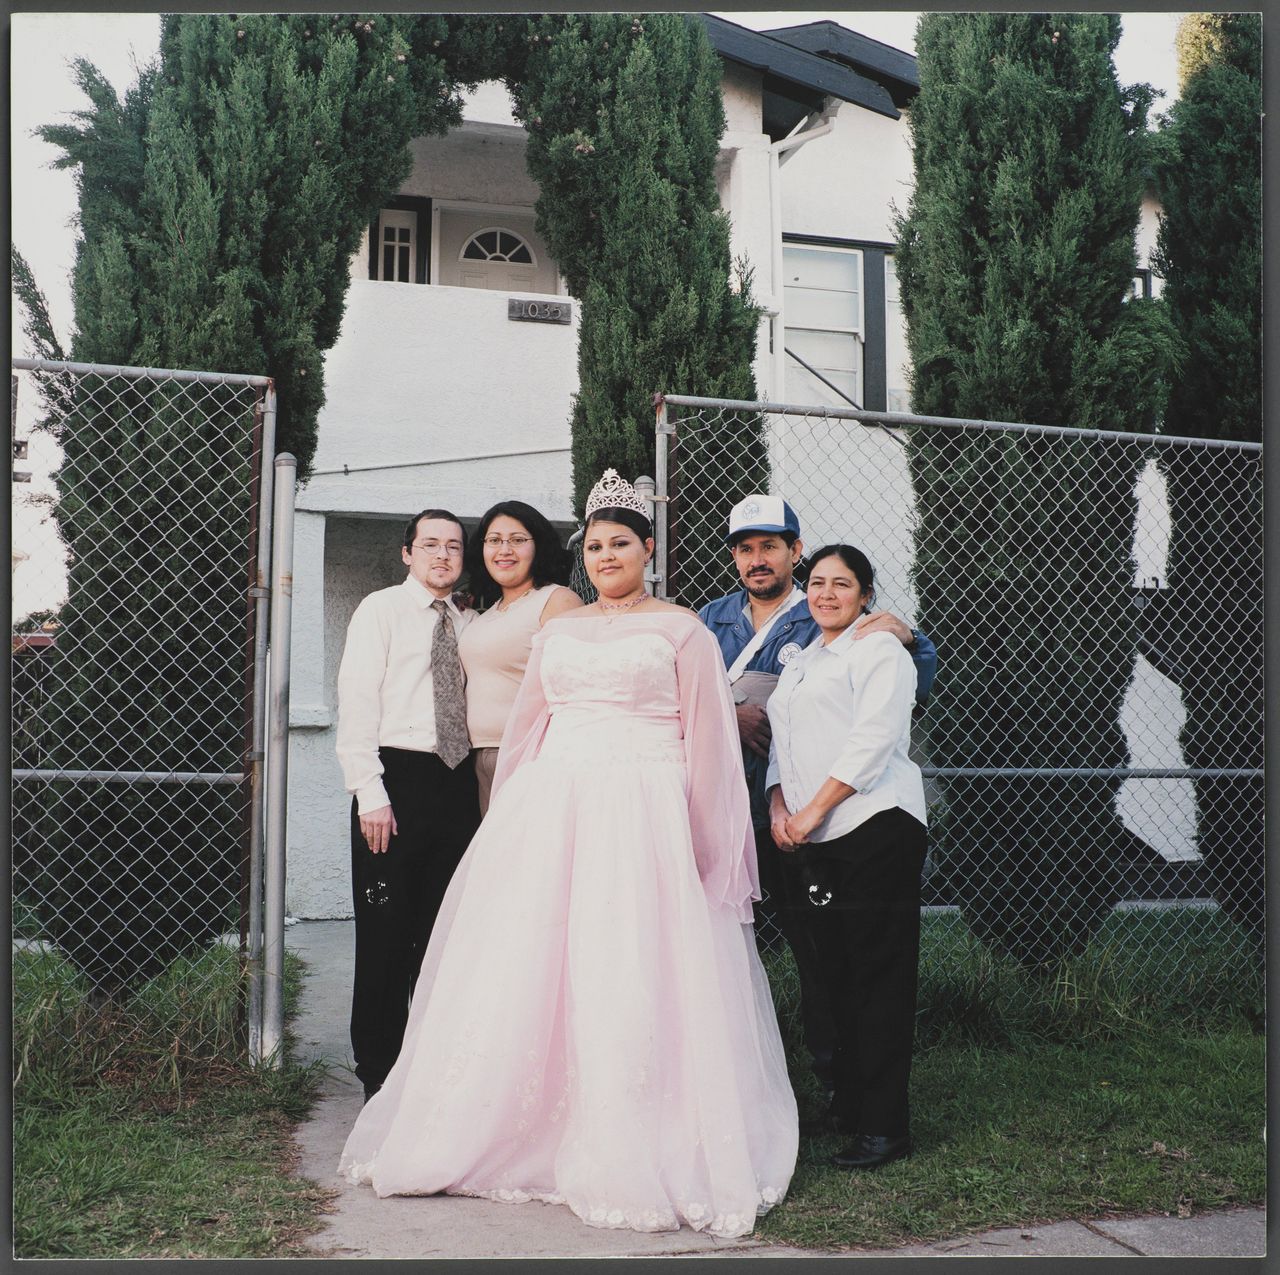 "1103 Chester Street," 16x16 giclee print, 2003, by Julie Placensia. The Polio Family, originally from El Salvador, commissioned this photograph on the day of Nancy’s quinceañera. The family continues to live in the duplex, and rents out the bottom portion to extended family.